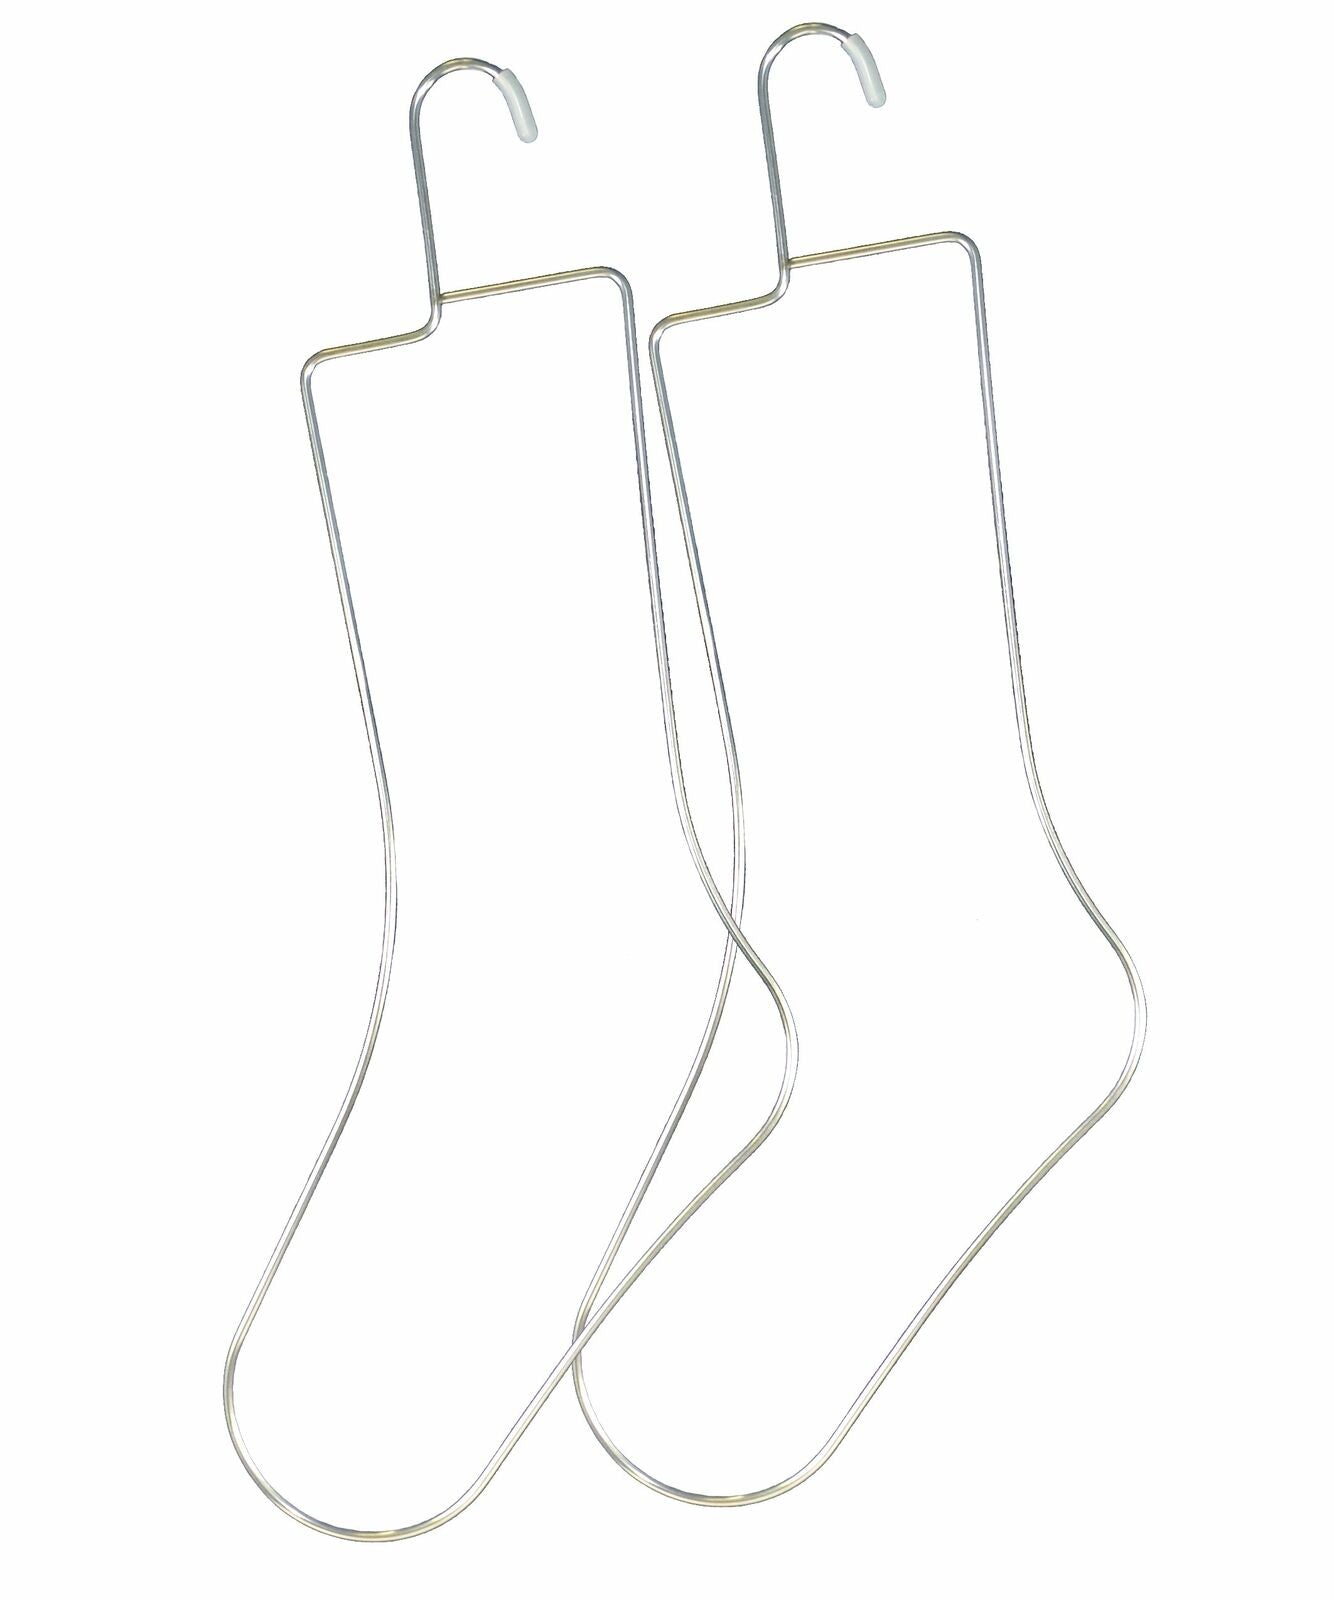 Stainless steel sock blockers from Bryson are the perfect way to give your knitted and crocheted socks a perfect finish.